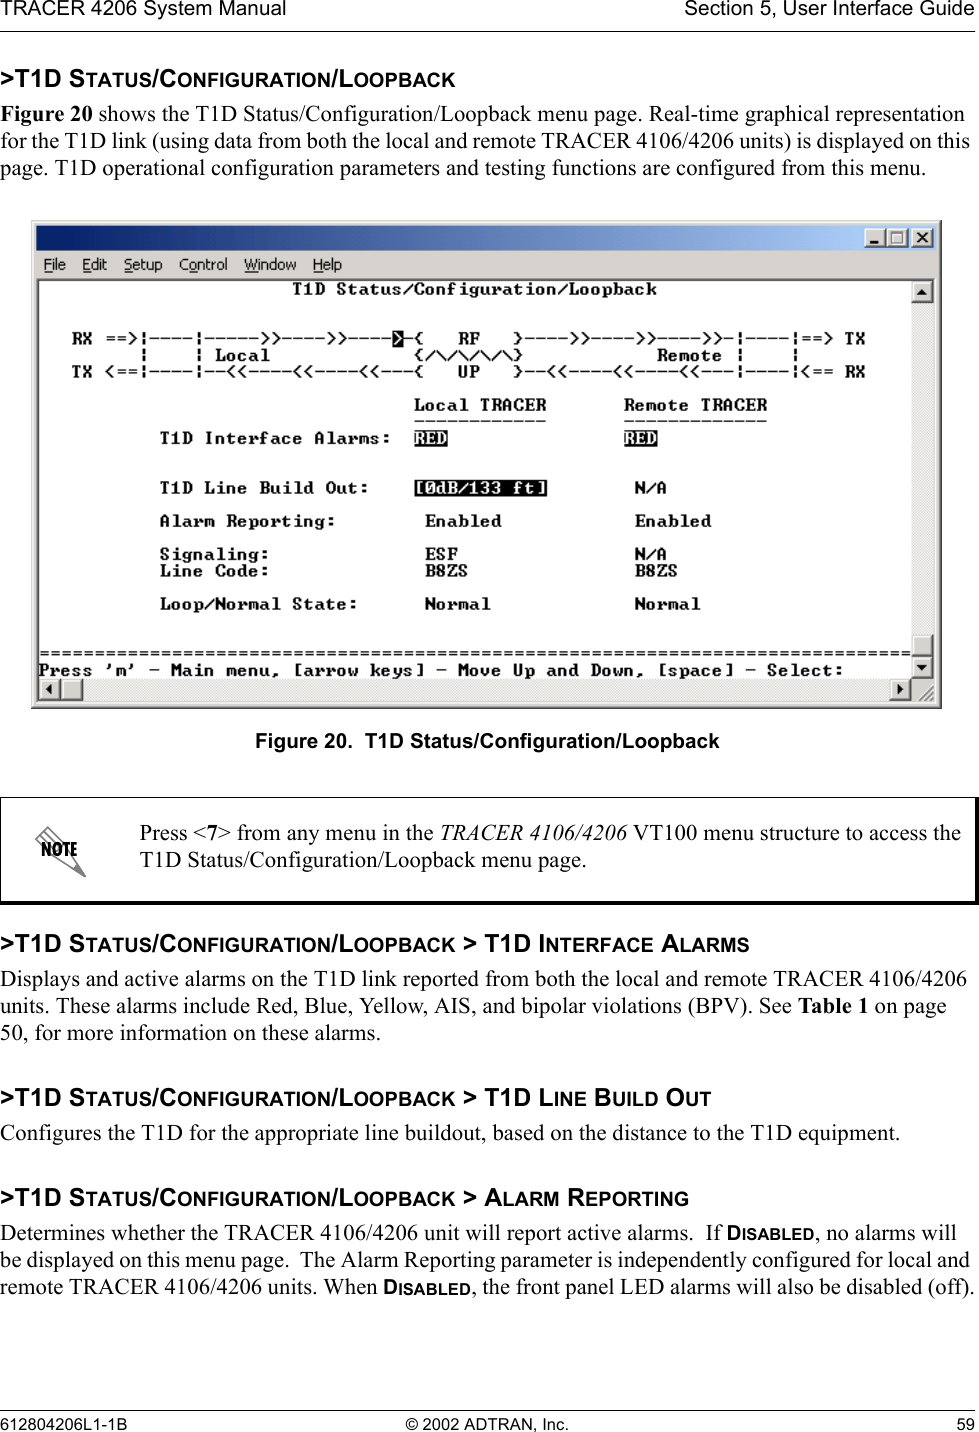 TRACER 4206 System Manual Section 5, User Interface Guide612804206L1-1B © 2002 ADTRAN, Inc. 59&gt;T1D STATUS/CONFIGURATION/LOOPBACKFigure 20 shows the T1D Status/Configuration/Loopback menu page. Real-time graphical representation for the T1D link (using data from both the local and remote TRACER 4106/4206 units) is displayed on this page. T1D operational configuration parameters and testing functions are configured from this menu.Figure 20.  T1D Status/Configuration/Loopback&gt;T1D STATUS/CONFIGURATION/LOOPBACK &gt; T1D INTERFACE ALARMSDisplays and active alarms on the T1D link reported from both the local and remote TRACER 4106/4206 units. These alarms include Red, Blue, Yellow, AIS, and bipolar violations (BPV). See Table 1 on page 50, for more information on these alarms.&gt;T1D STATUS/CONFIGURATION/LOOPBACK &gt; T1D LINE BUILD OUTConfigures the T1D for the appropriate line buildout, based on the distance to the T1D equipment.  &gt;T1D STATUS/CONFIGURATION/LOOPBACK &gt; ALARM REPORTINGDetermines whether the TRACER 4106/4206 unit will report active alarms.  If DISABLED, no alarms will be displayed on this menu page.  The Alarm Reporting parameter is independently configured for local and remote TRACER 4106/4206 units. When DISABLED, the front panel LED alarms will also be disabled (off).Press &lt;7&gt; from any menu in the TRACER 4106/4206 VT100 menu structure to access the T1D Status/Configuration/Loopback menu page.